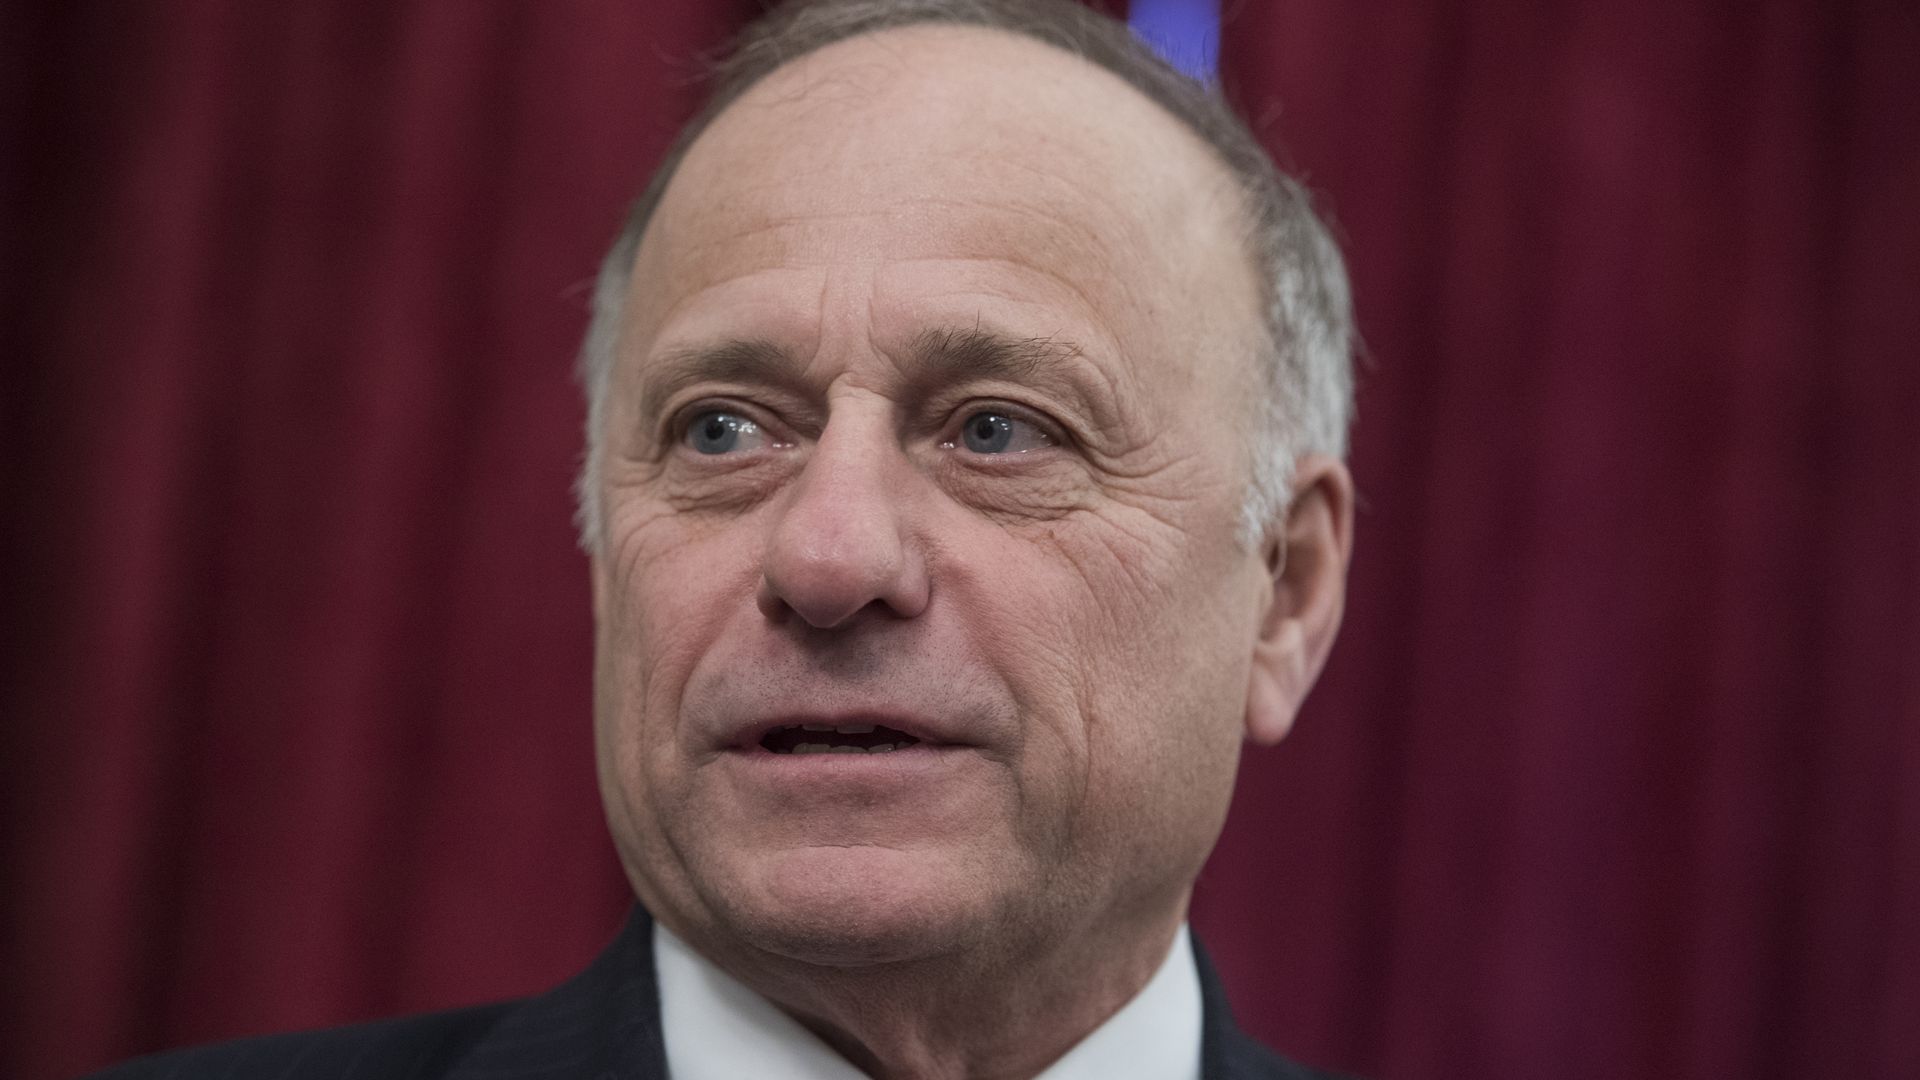 Rep. Steve King, R-Iowa, attends a rally for Iowans.